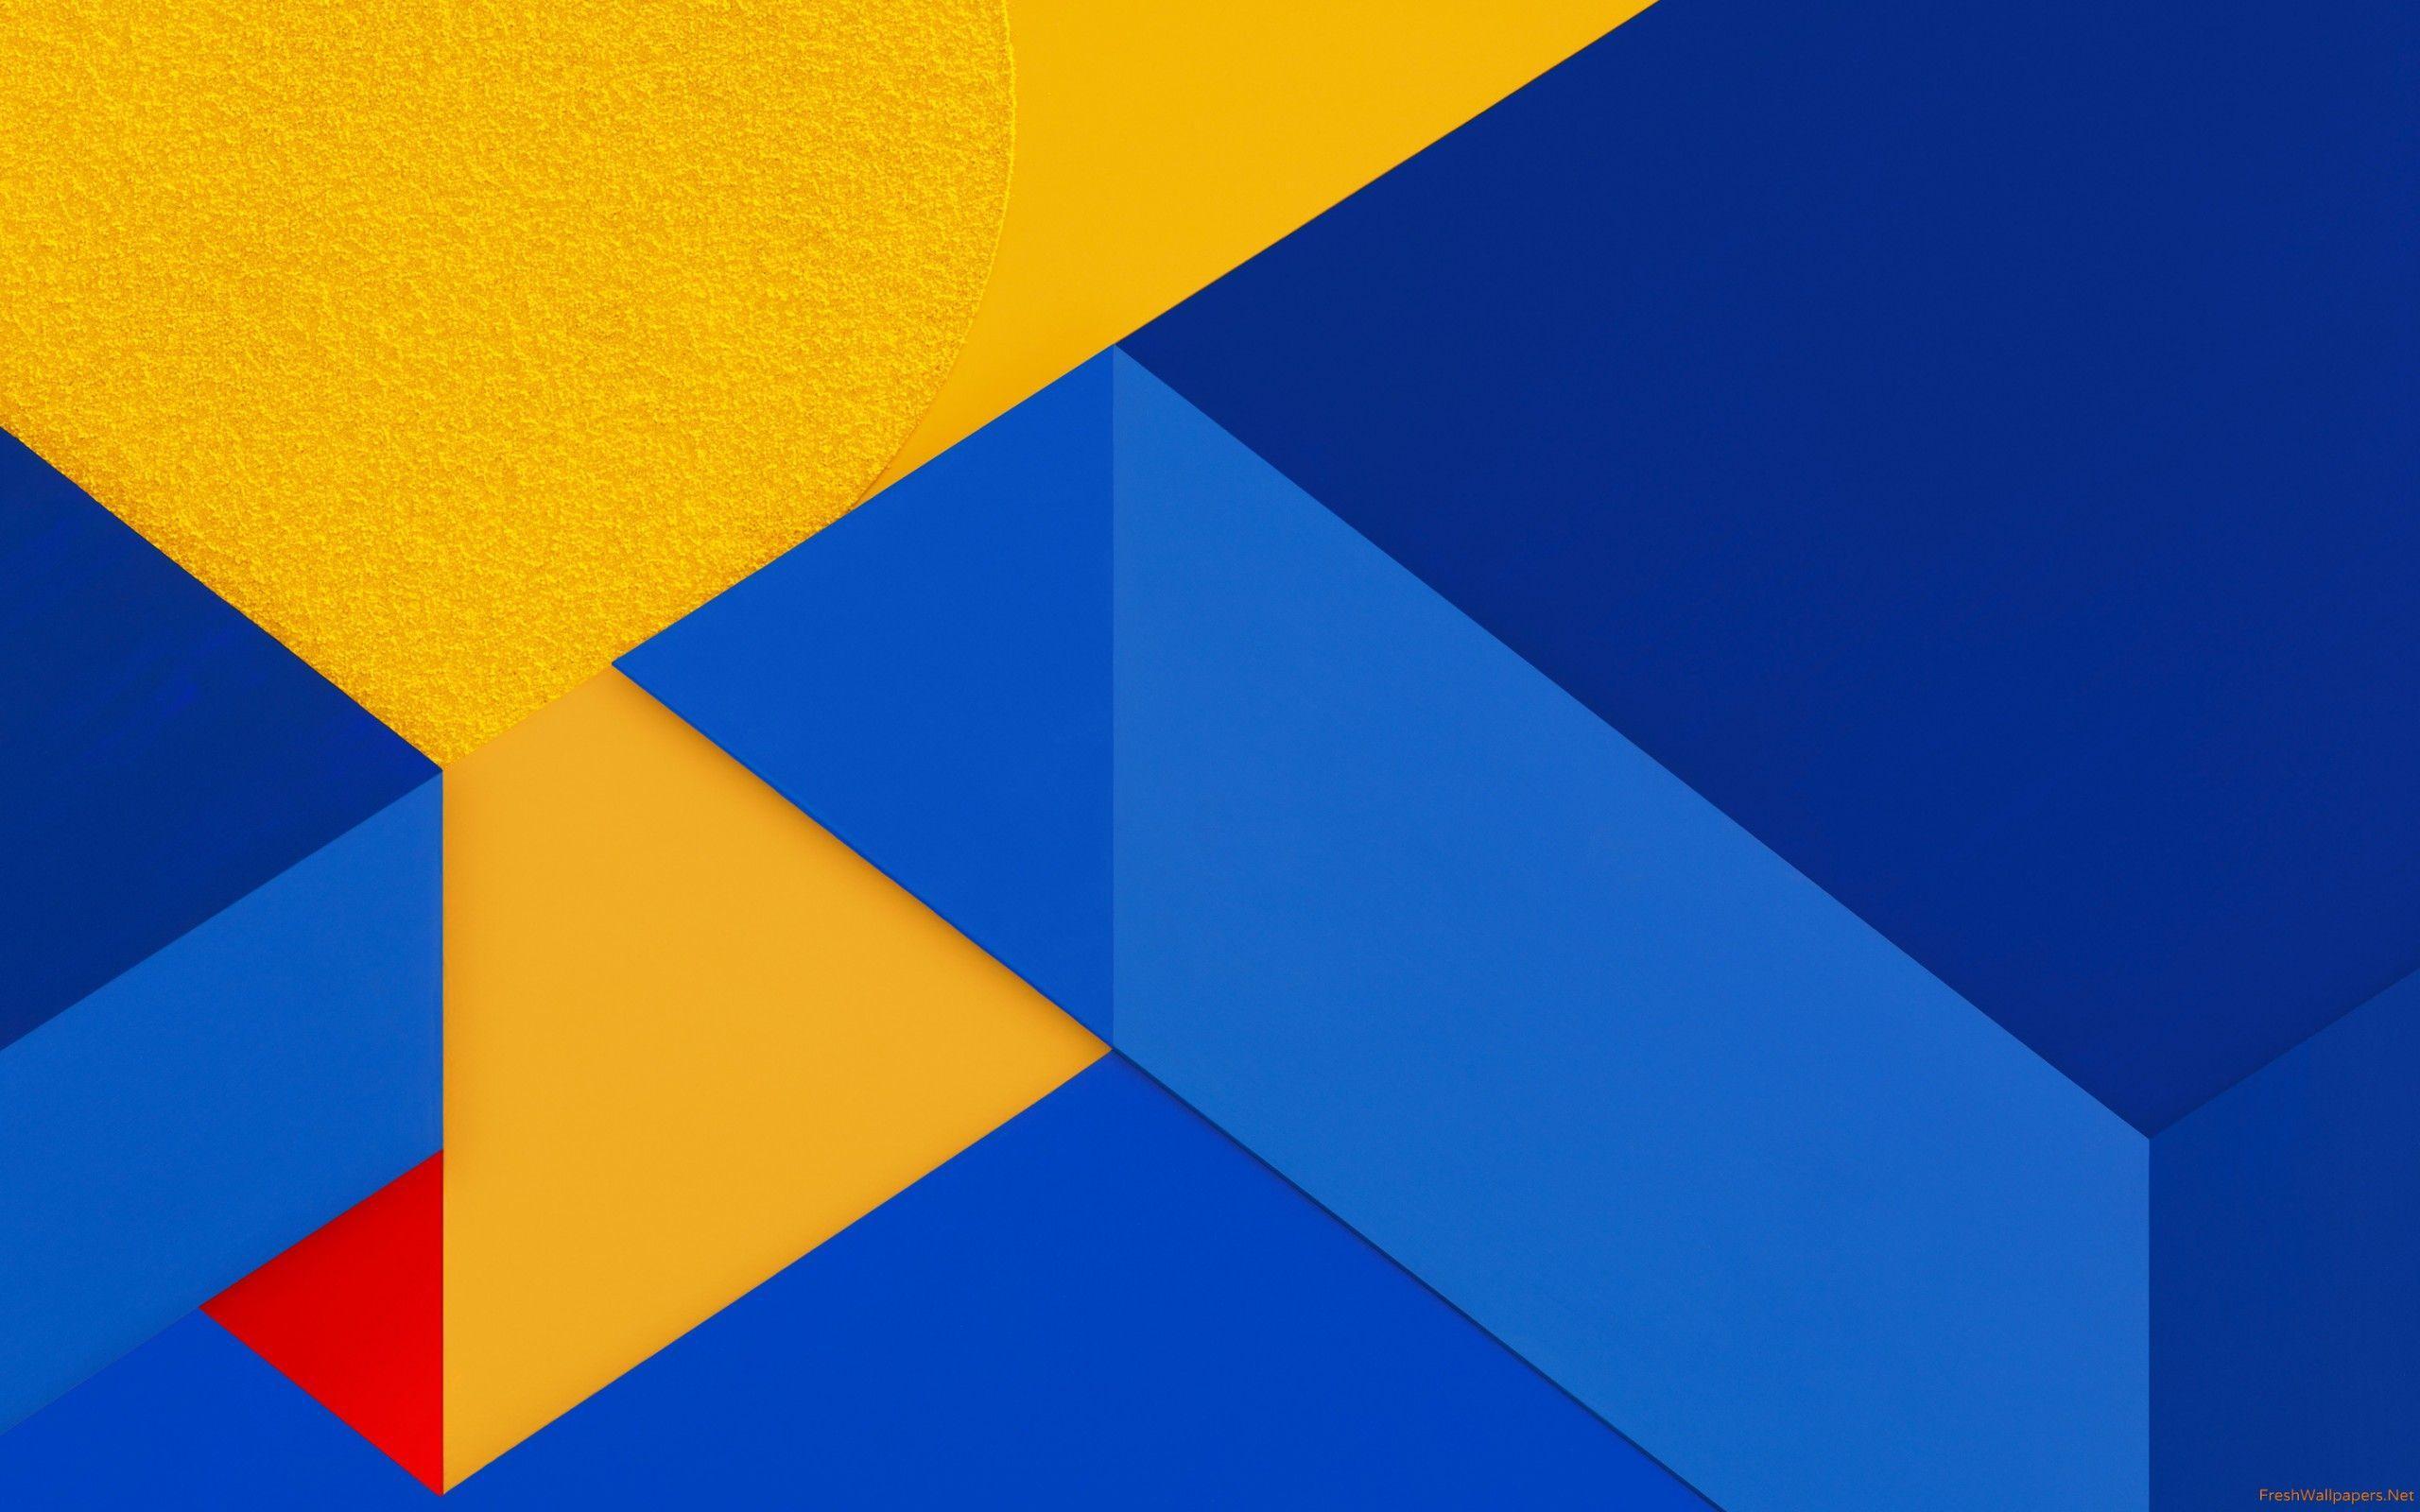 Material Design Android 6.0 Marshmallow wallpaper